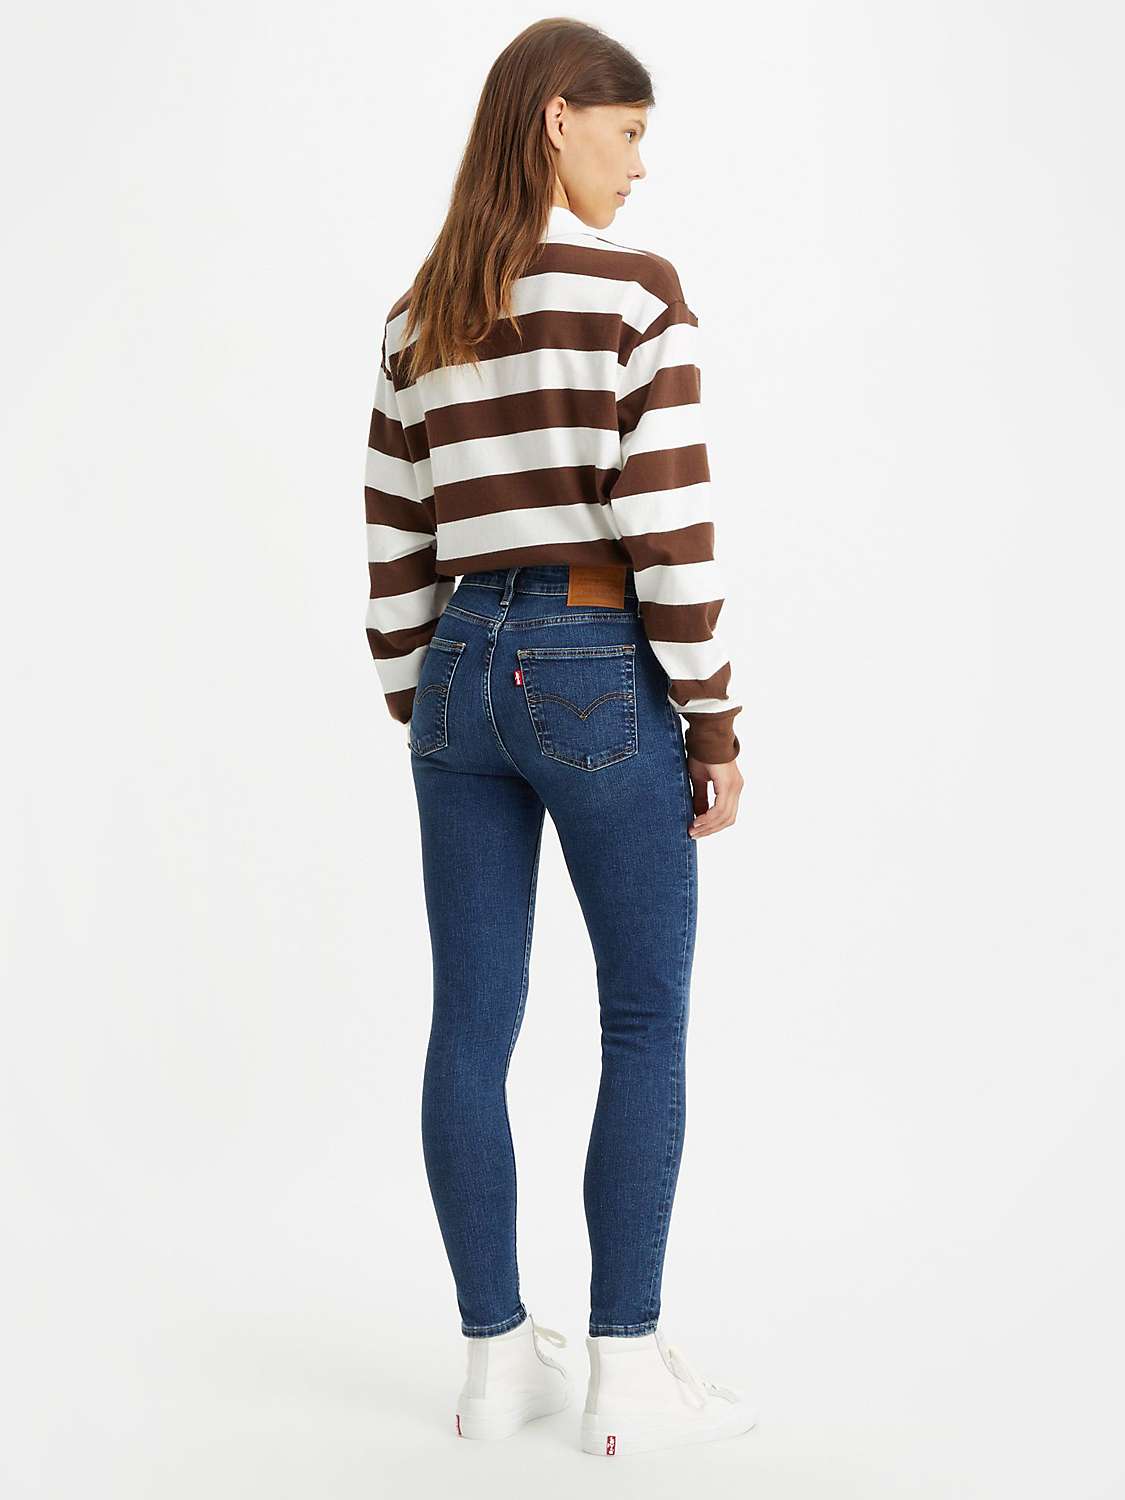 Buy Levi's 721 High Rise Skinny Jeans Online at johnlewis.com